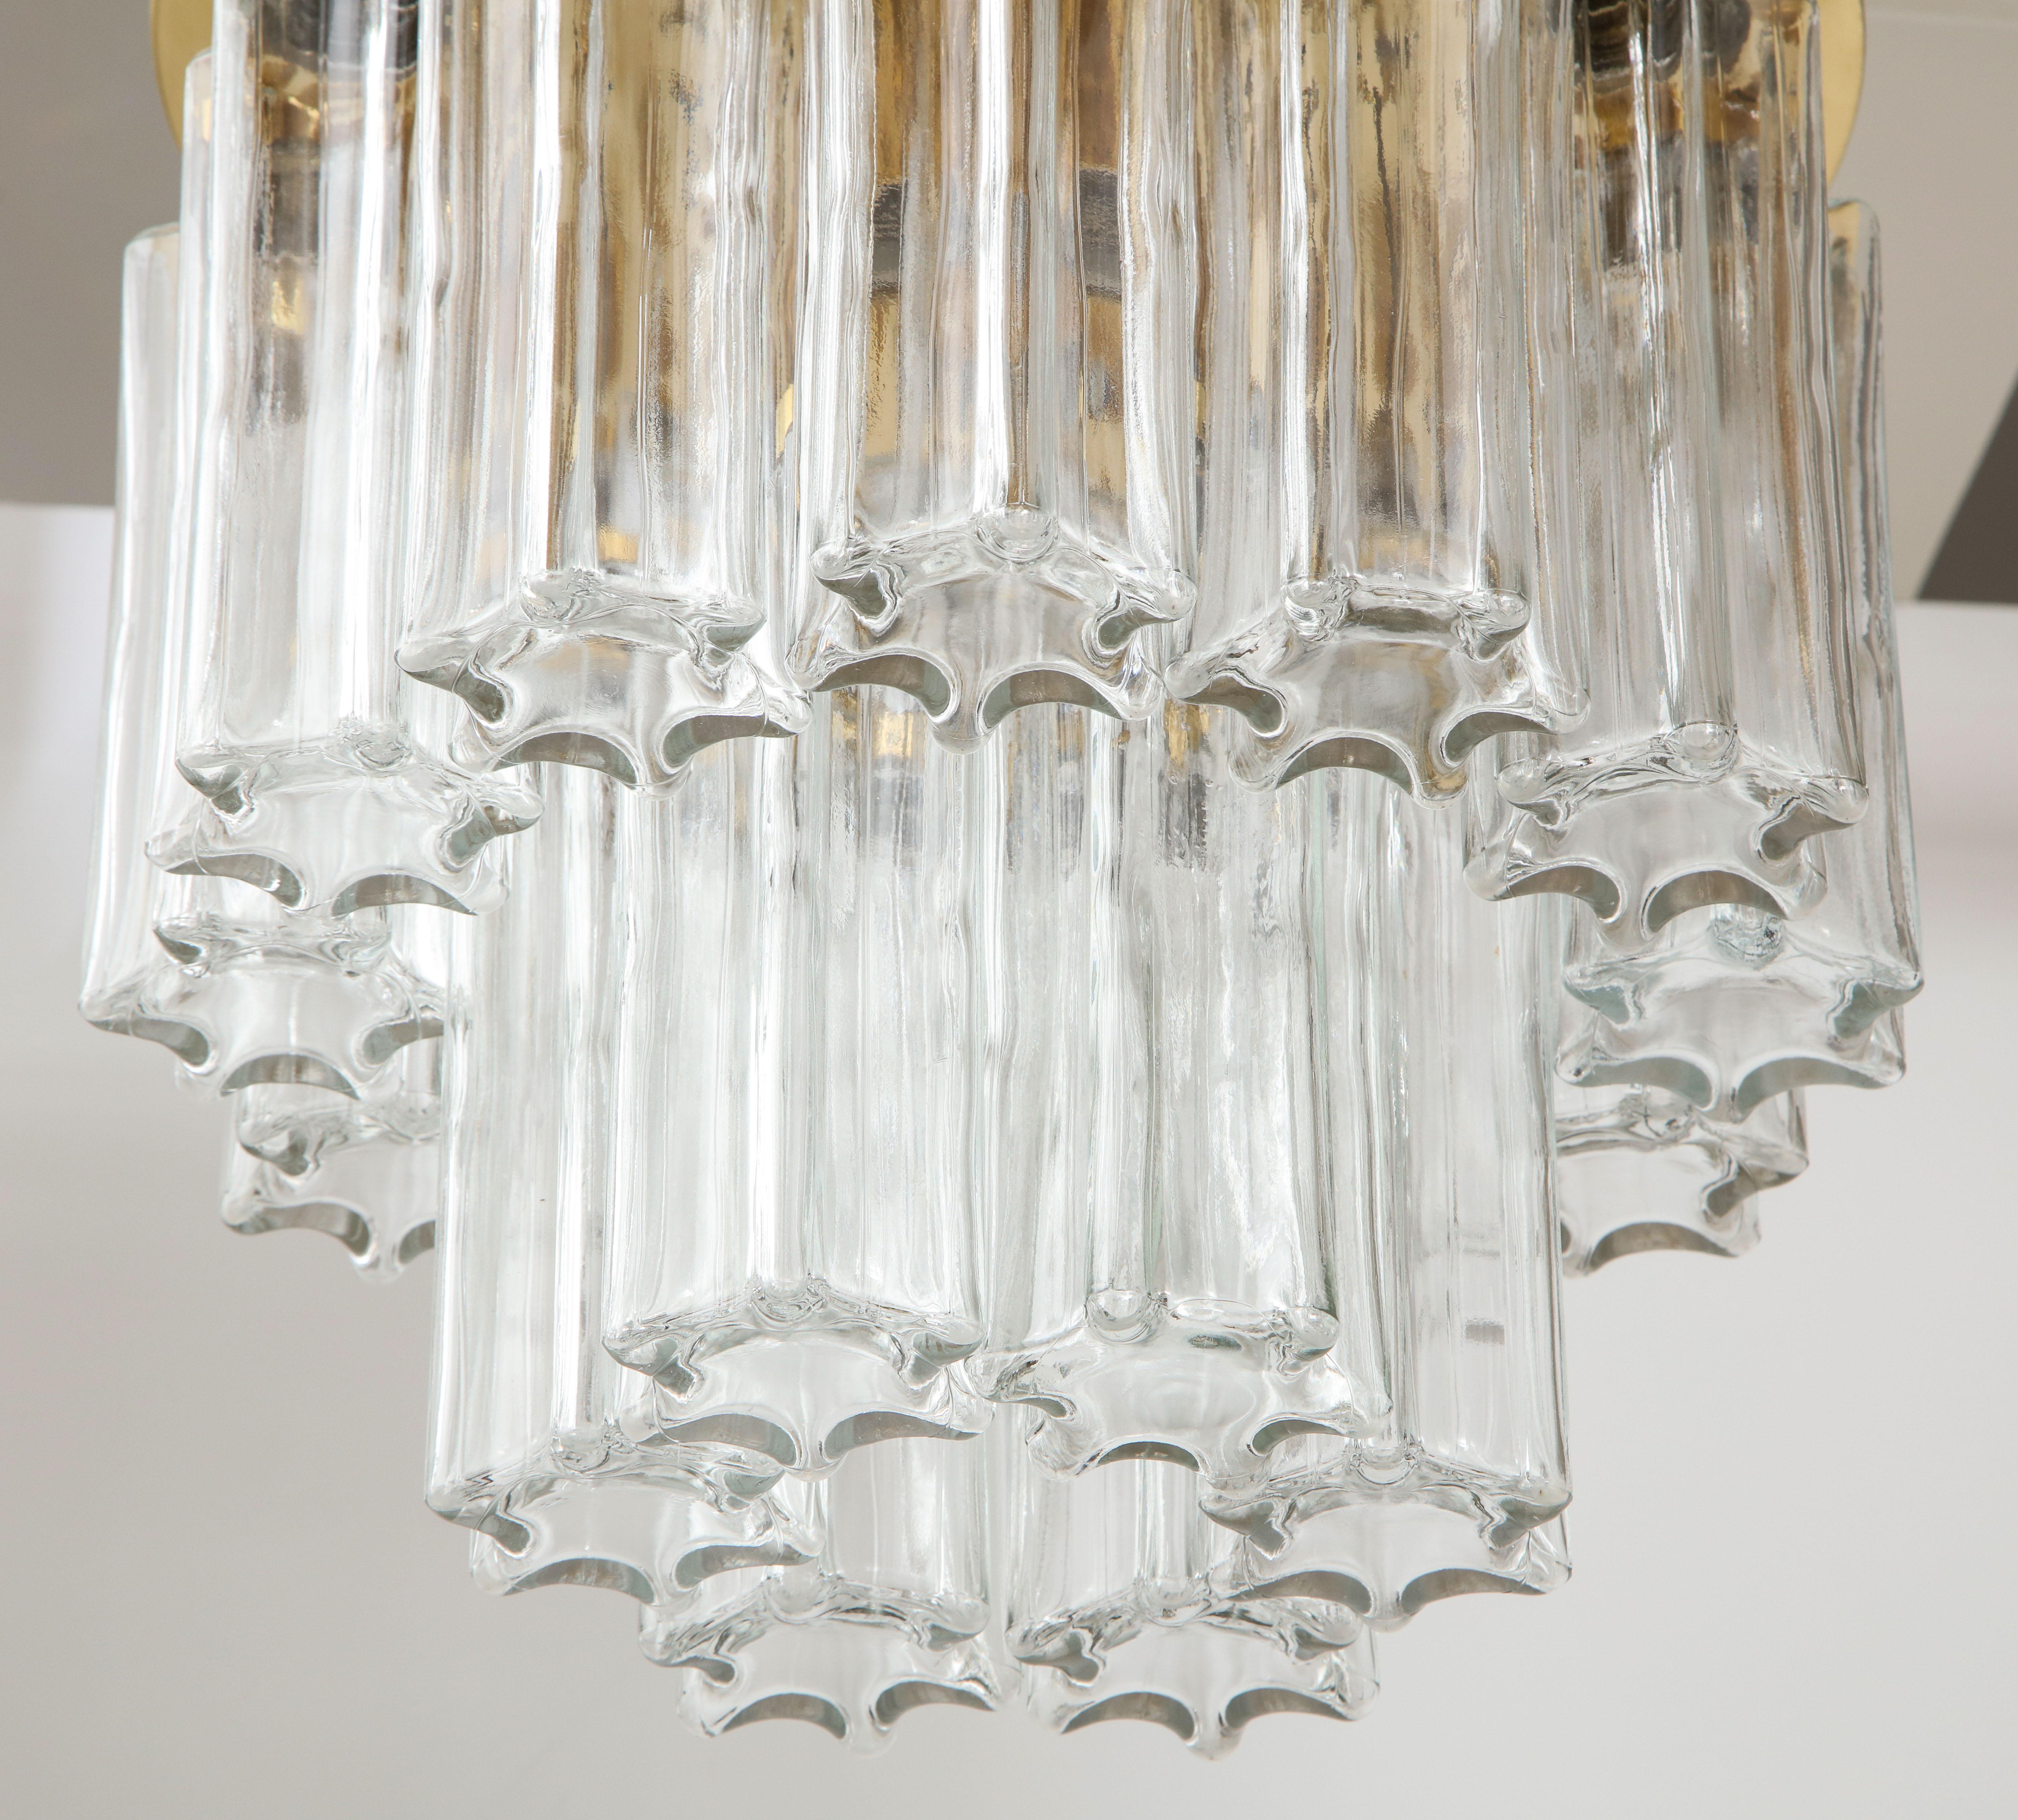 1960s flush mount ceiling fixture by Doria lighting company.
The textured star shaped glass tubes hook on to the polished brass fixture
which has three light sources.
The fixture has been newly rewired for the US.